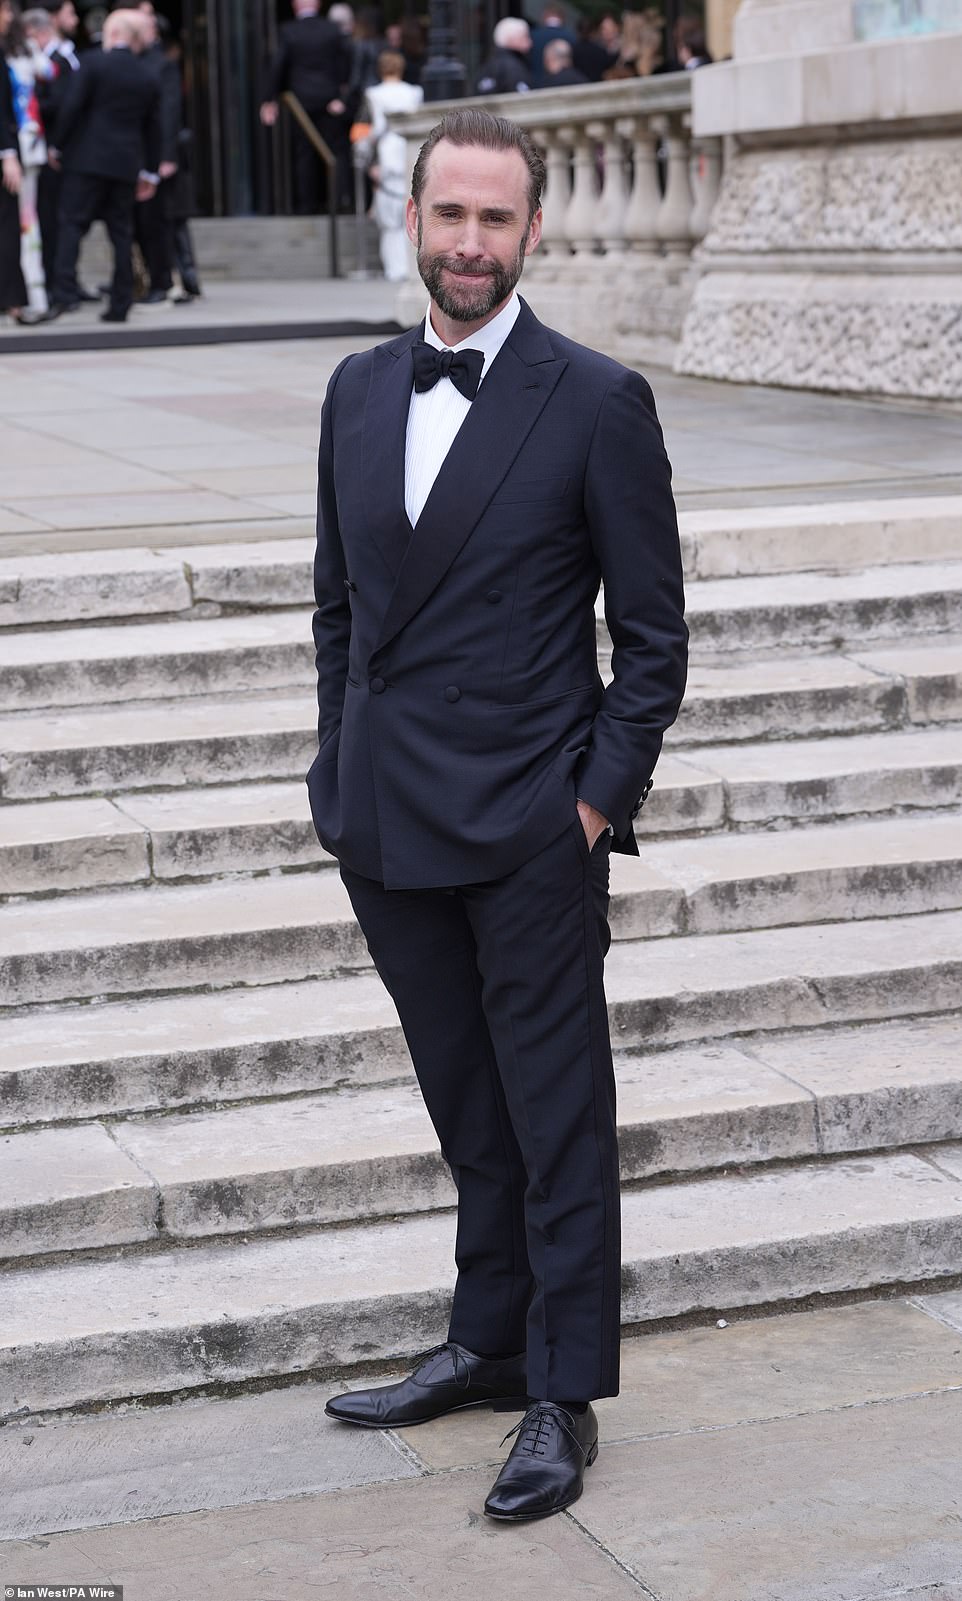 One of the Best Actor nominees, Joseph Fiennes, looked handsome in a black suit and coordinating bow tie